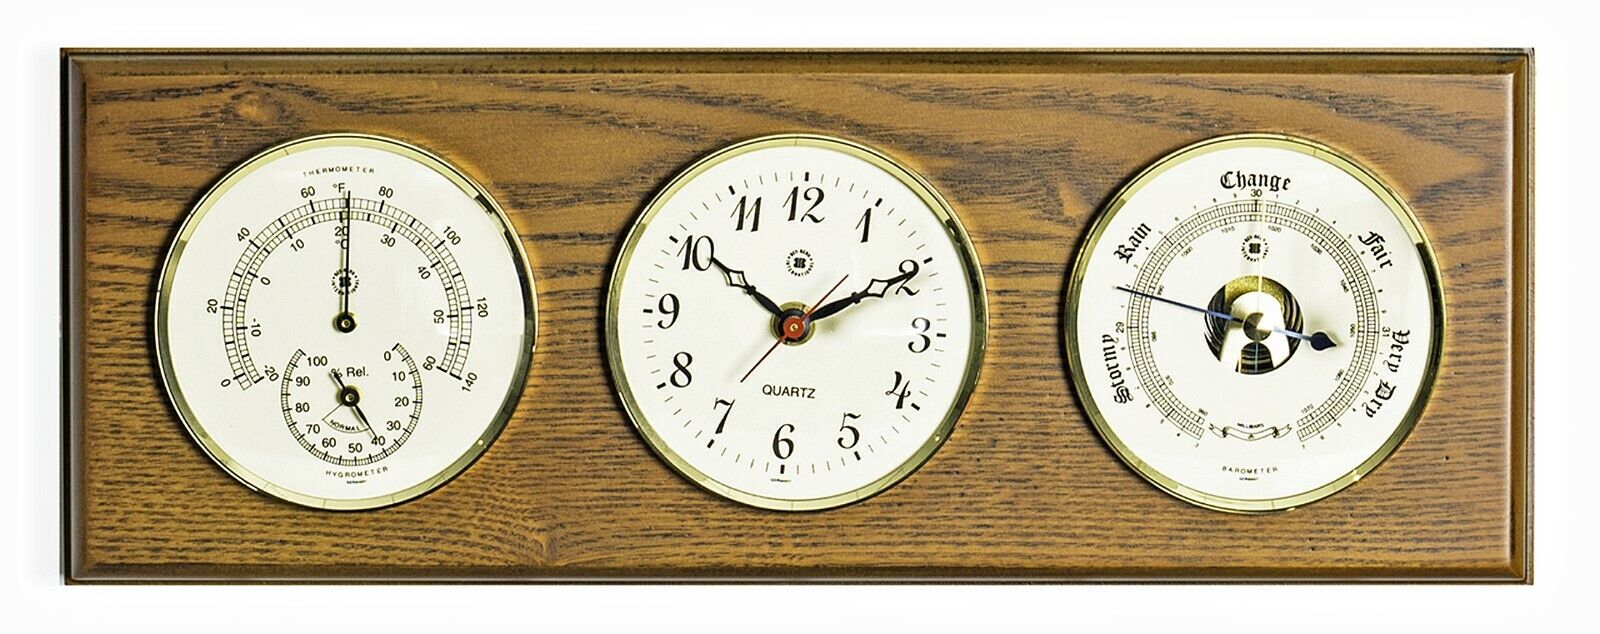 GLOUCESTER CLOCK, BAROMETER & THERMOMETER/HYGROMETER - WALL WEATHER STATION